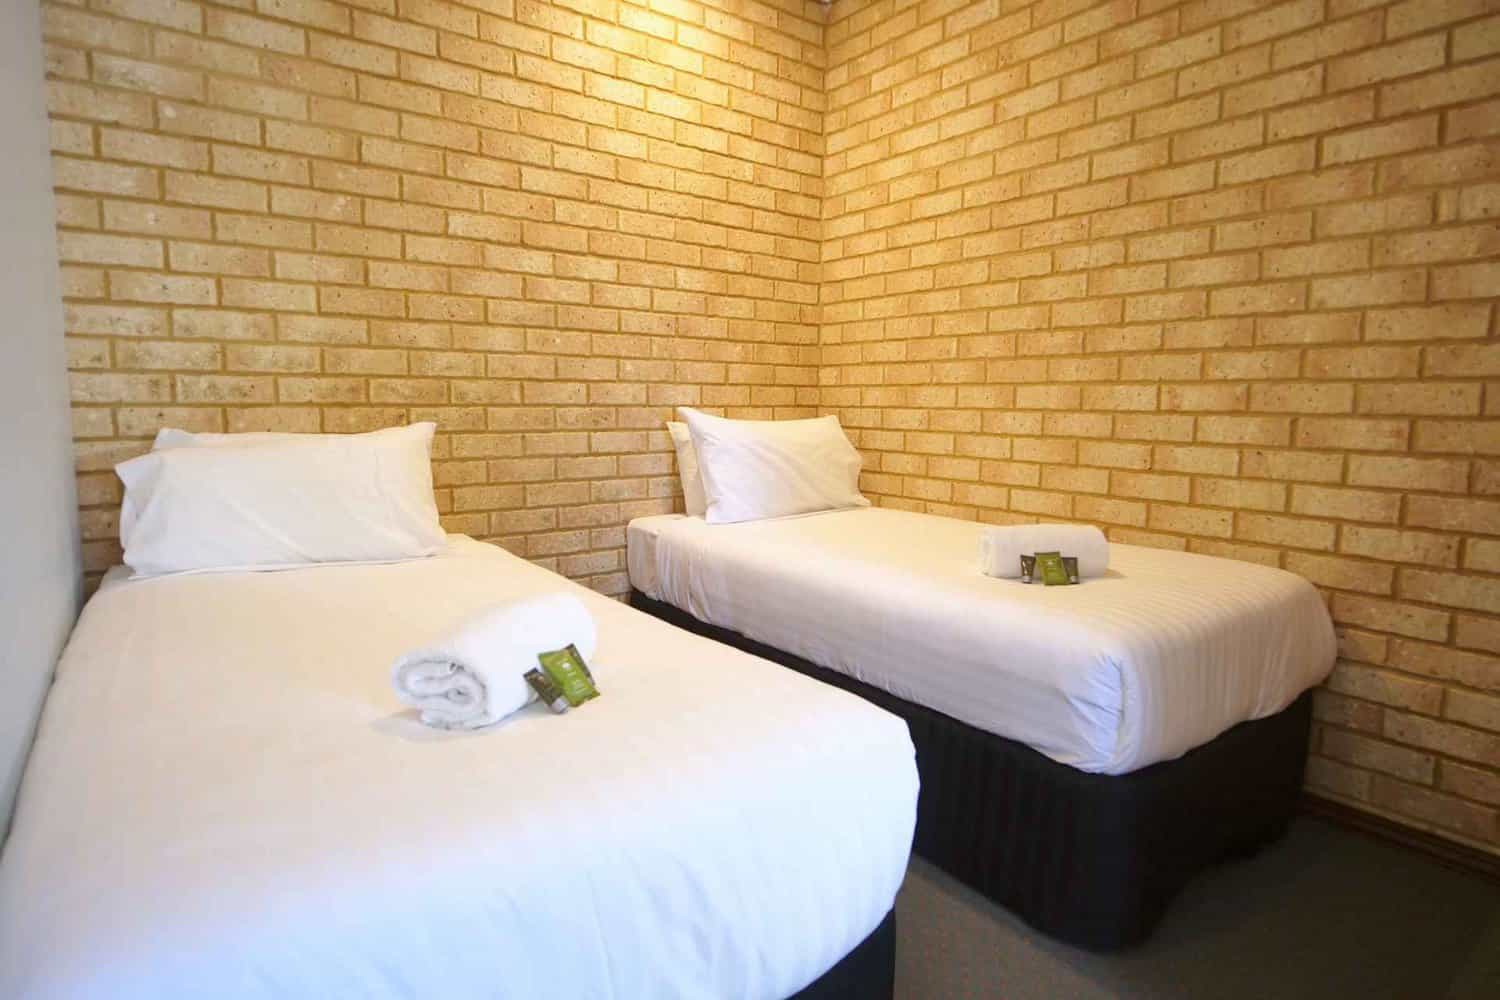 Twin single beds with white linens in a hotel room featuring an exposed brick wall, each bed neatly made and accompanied by a small green amenity pack, offering a simple yet comfortable accommodation.